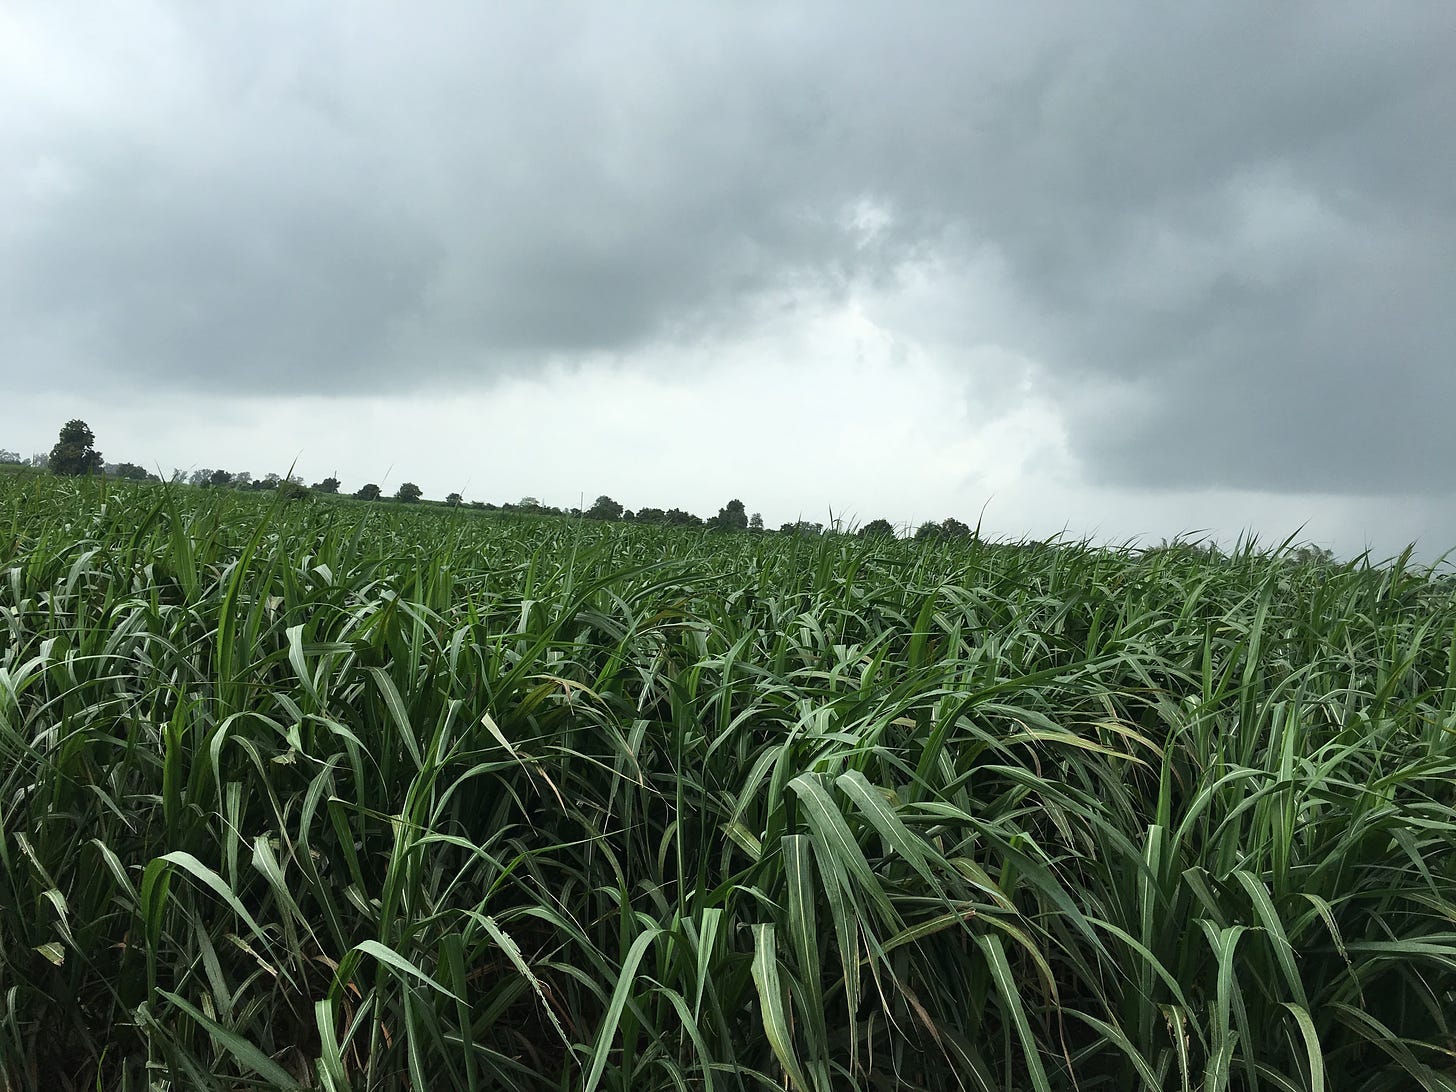 A sugarcane field is shown, with dark gray clouds in the distance.